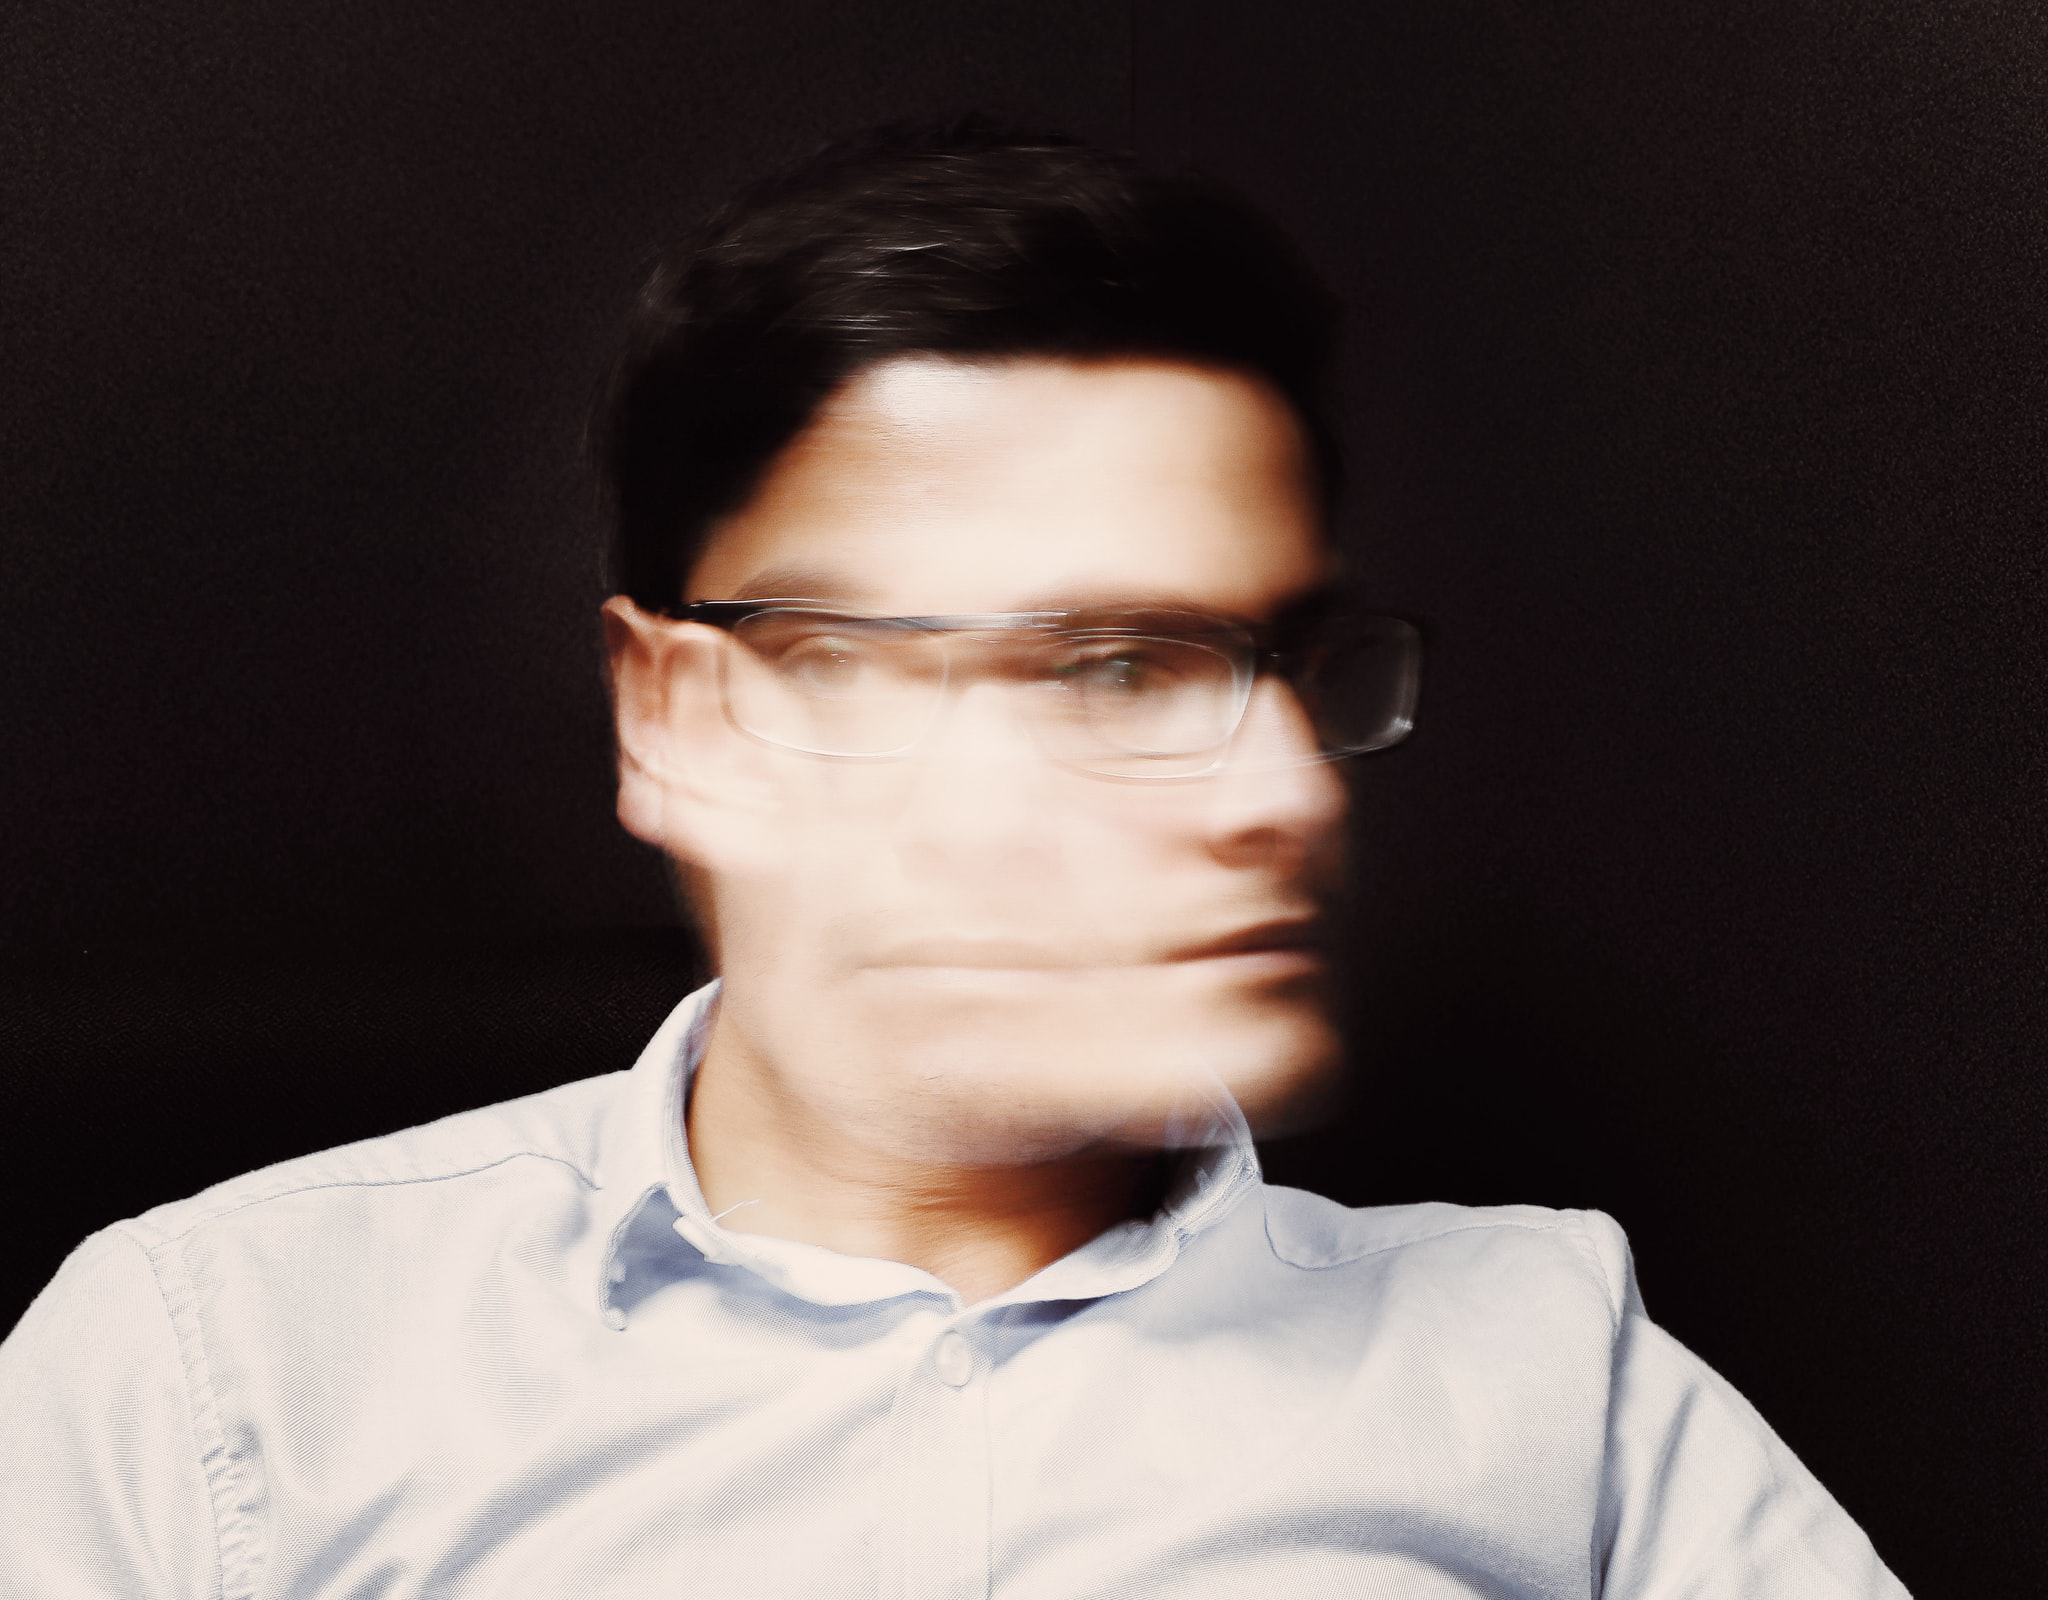 A blurry image of a man wearing glasses and shaking his head.